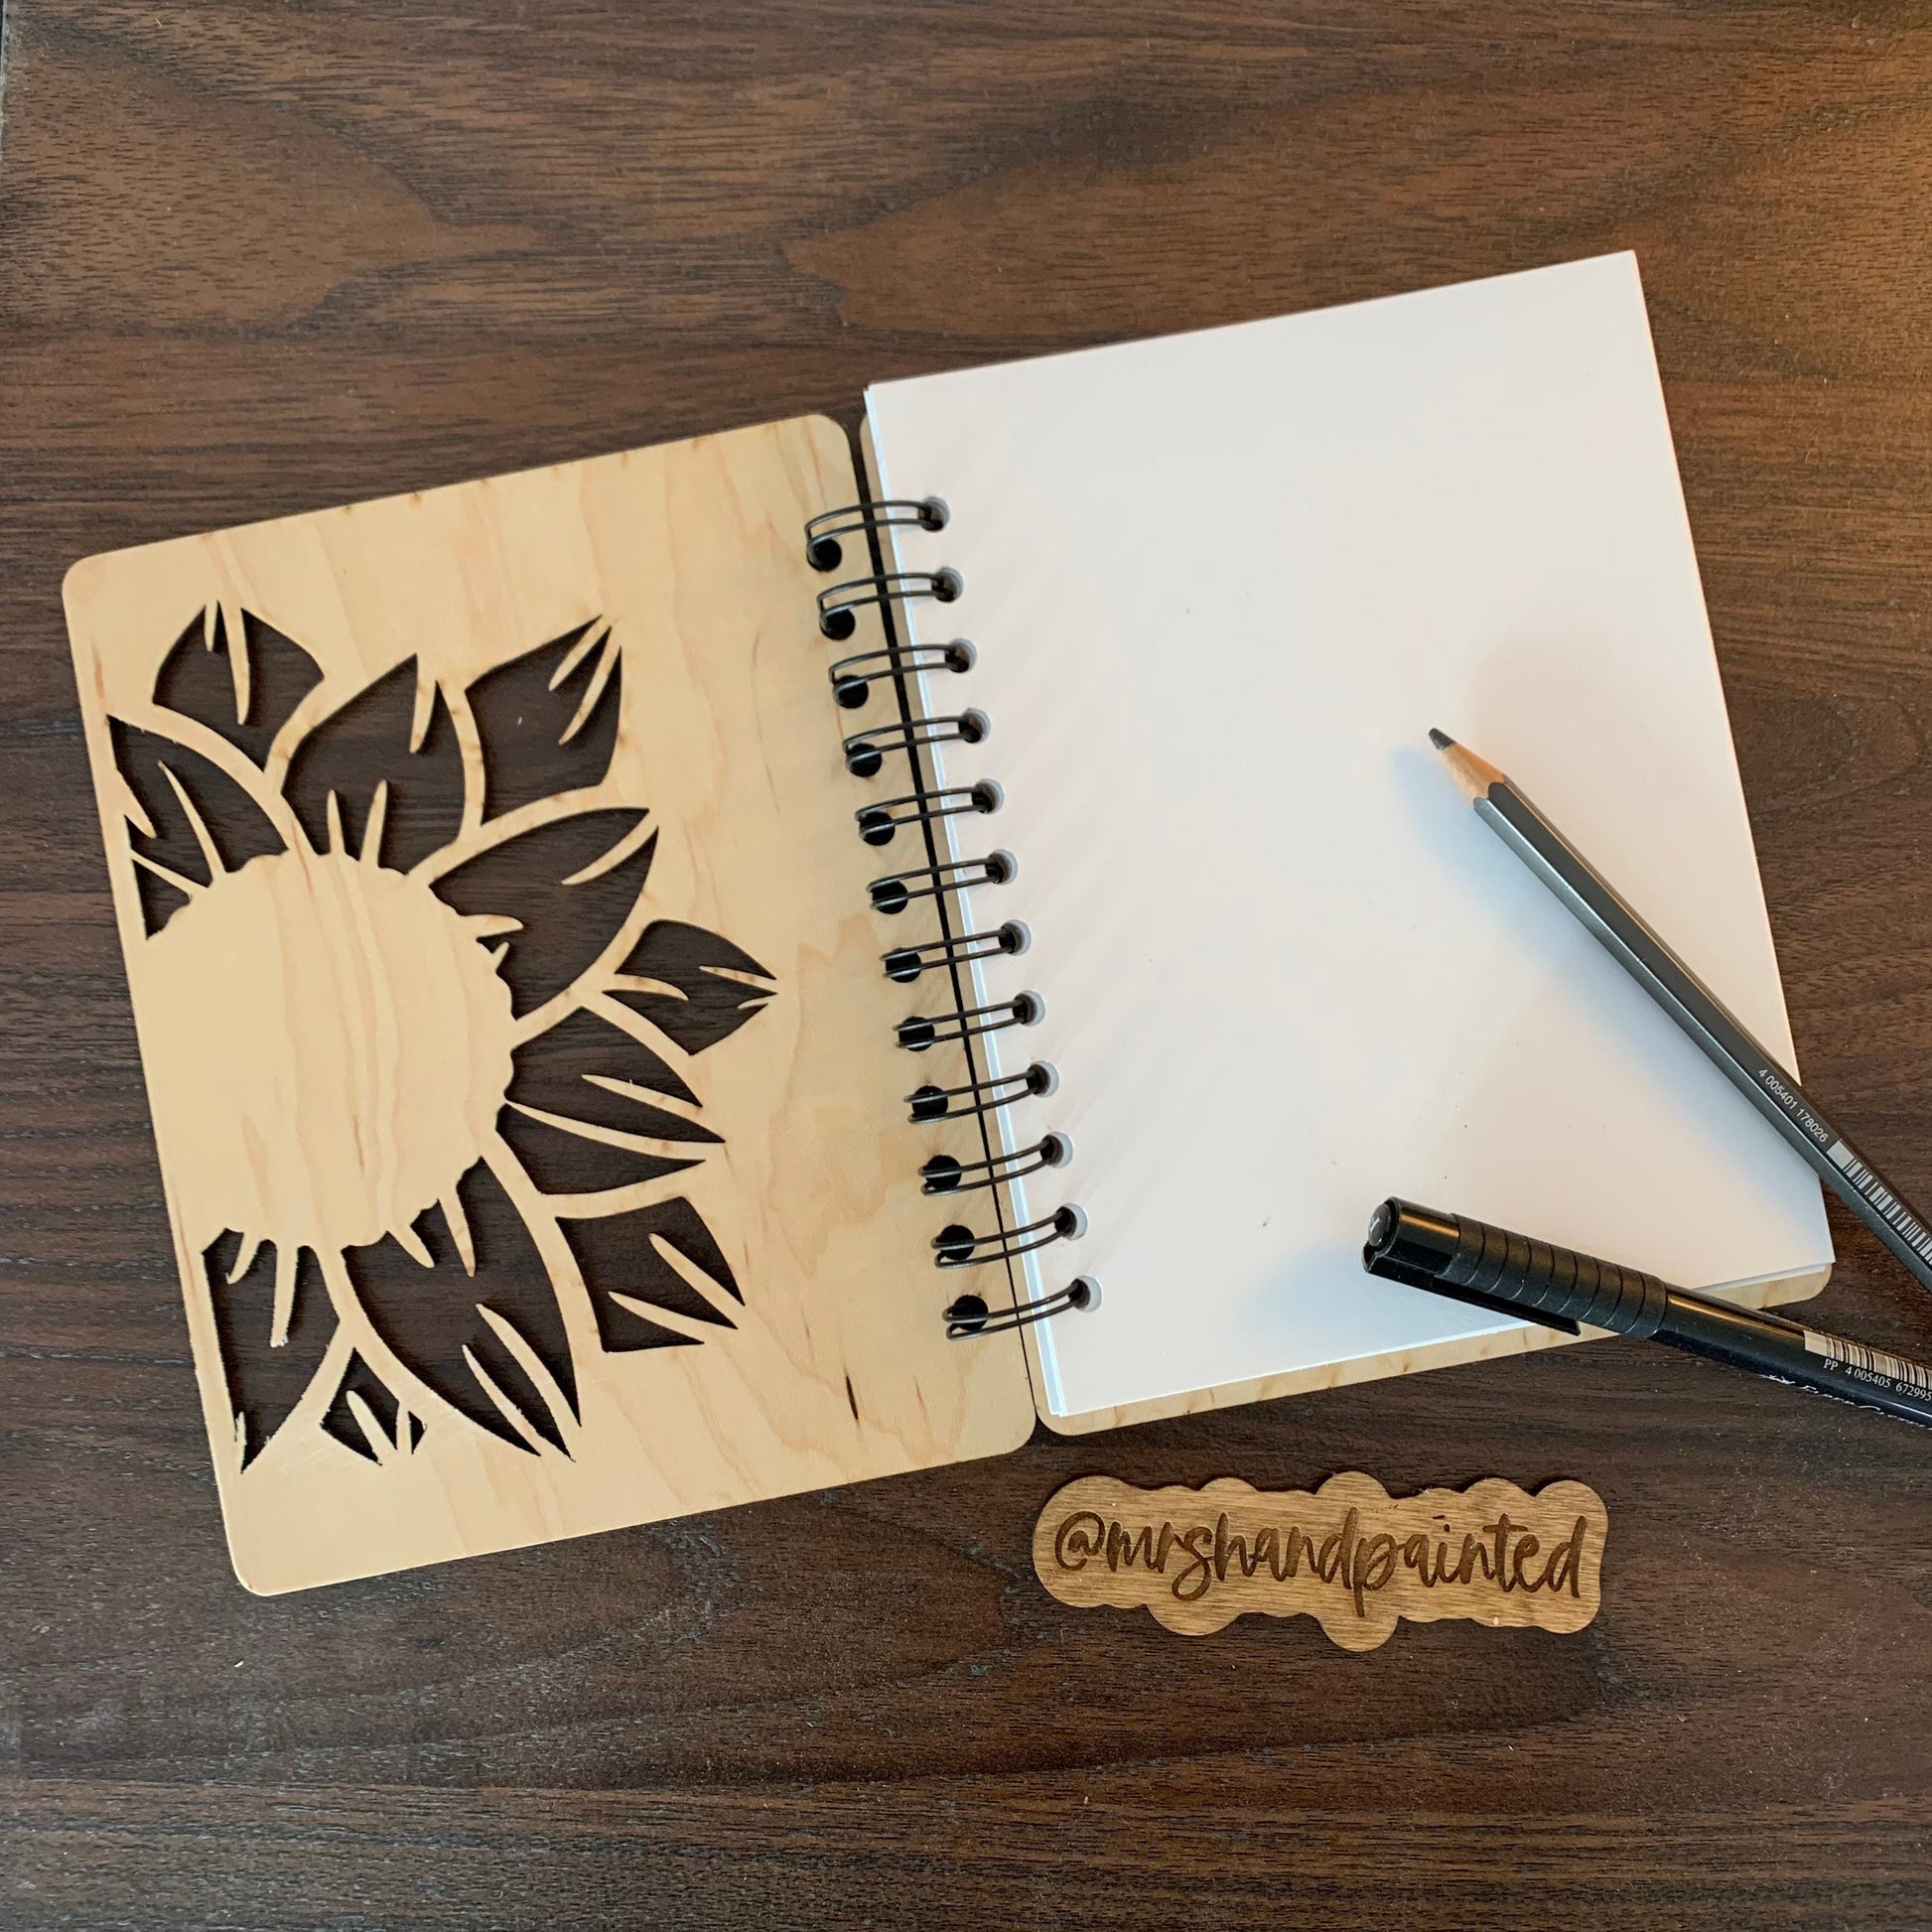 Engraved Spiral Wood Notebook with engraved pen - Personalized